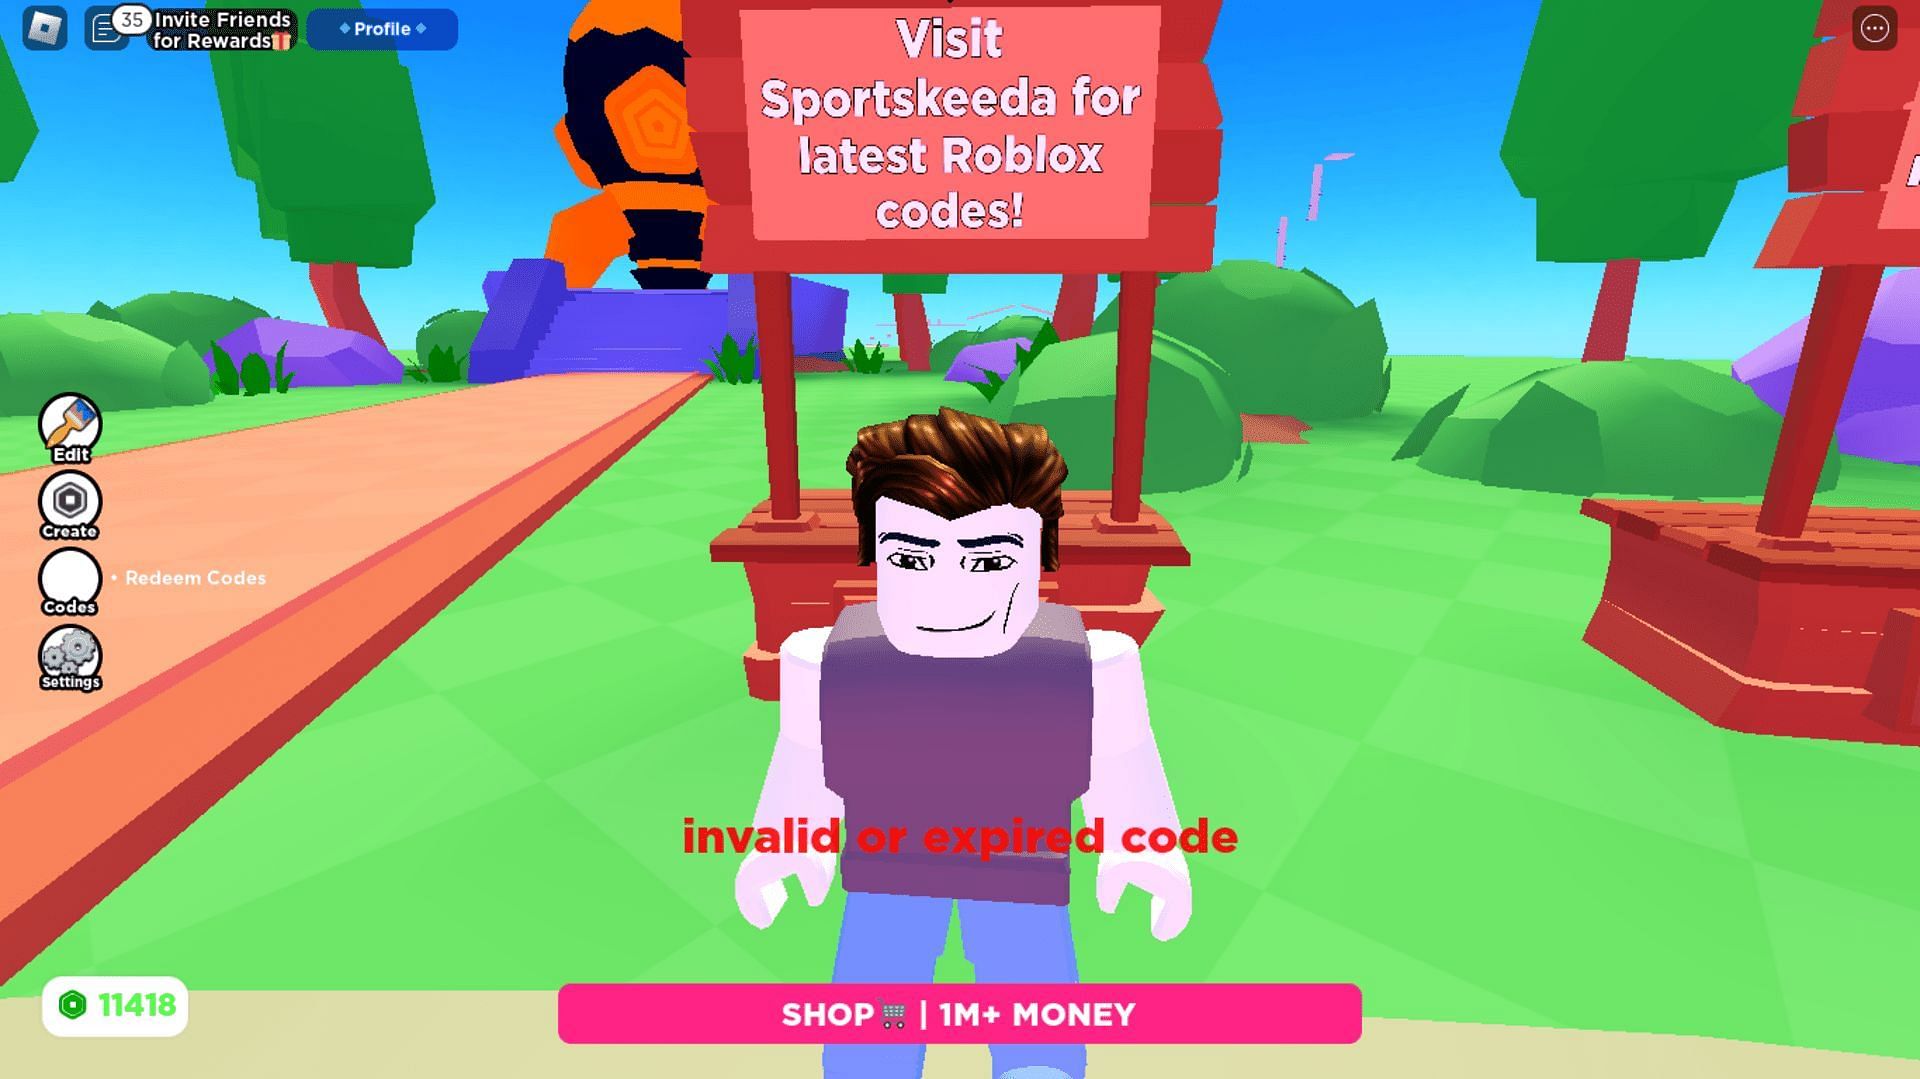 Troubleshoot codes in Earn and Donate with ease (Roblox || Sportskeeda)